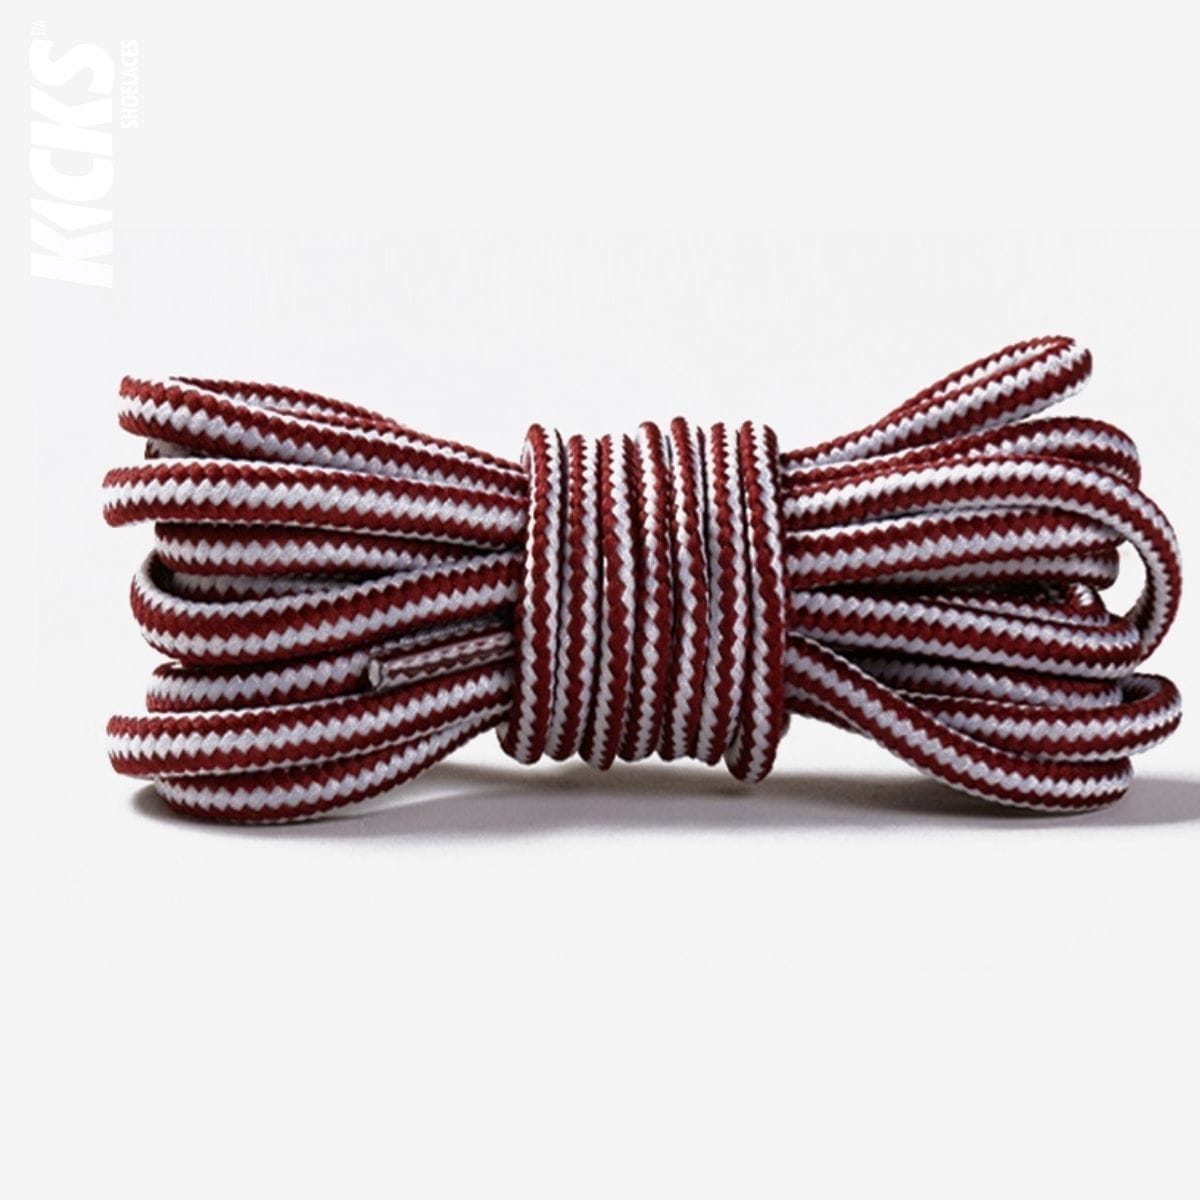 striped-two-color-shoelaces-for-casual-shoes-in-red-and-white